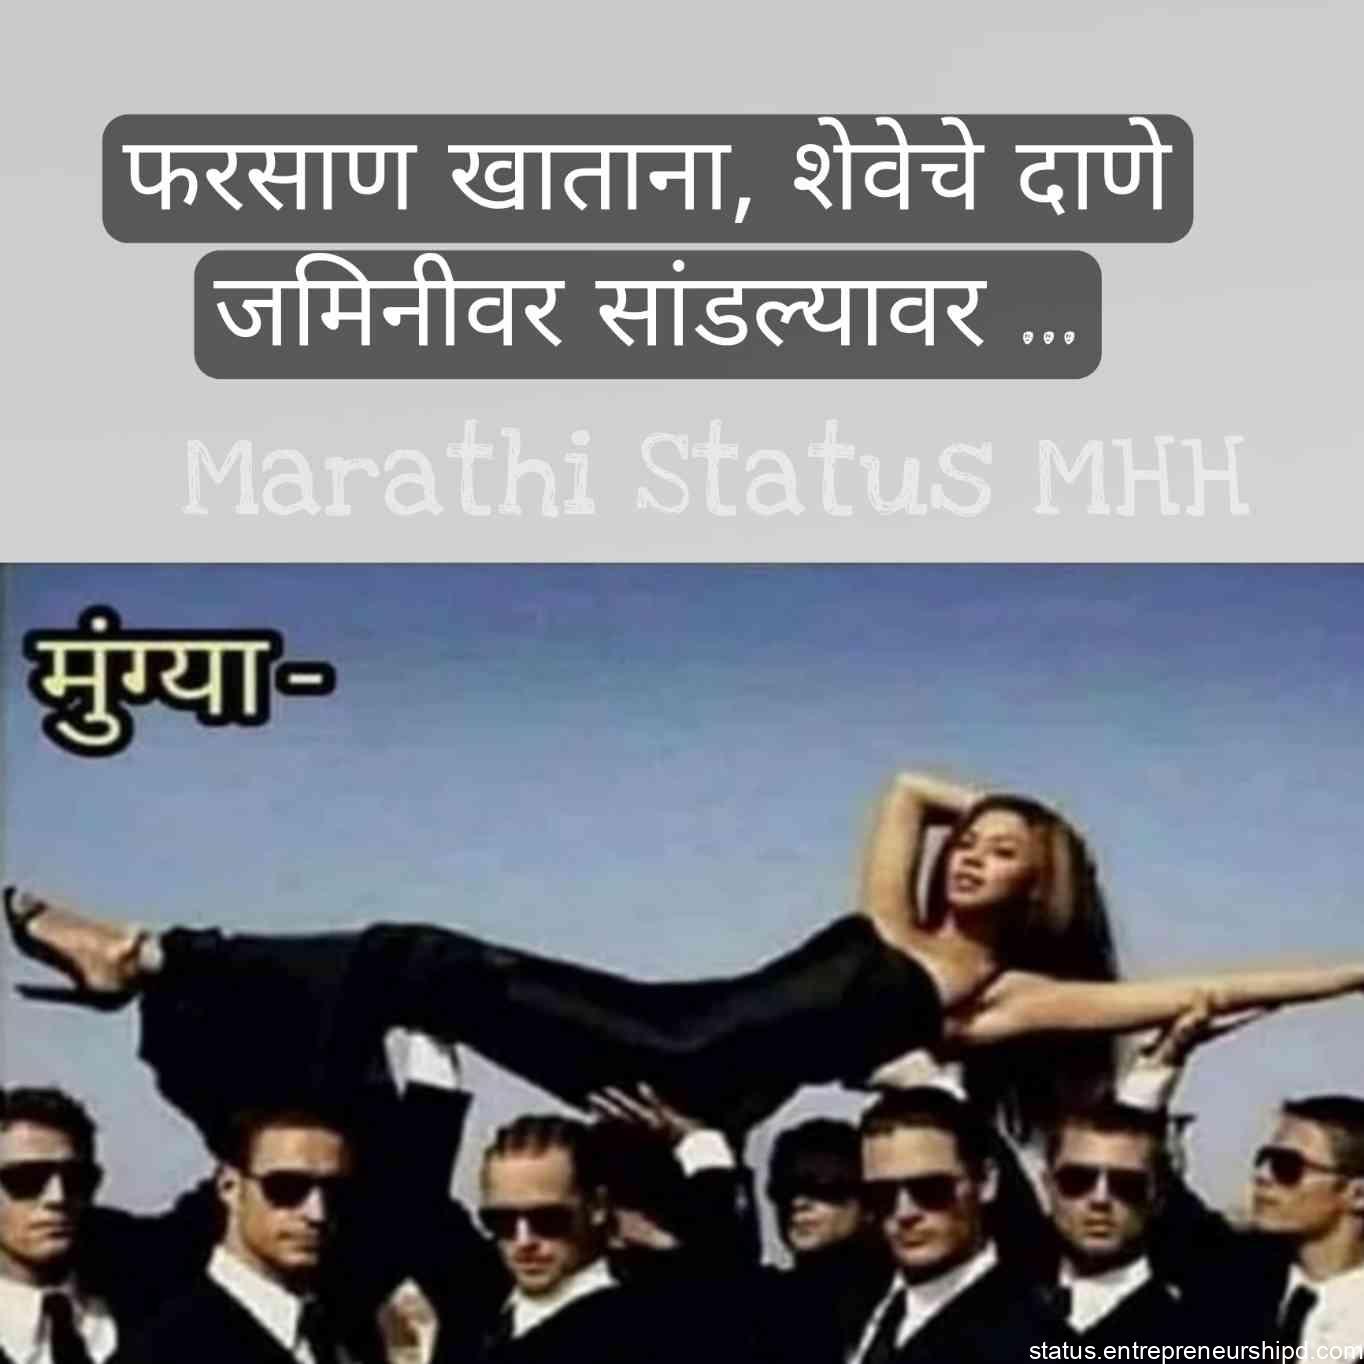 Marathi memes and trolls, marriage, funny text, best funny cat, images,text, trending Marathi memes